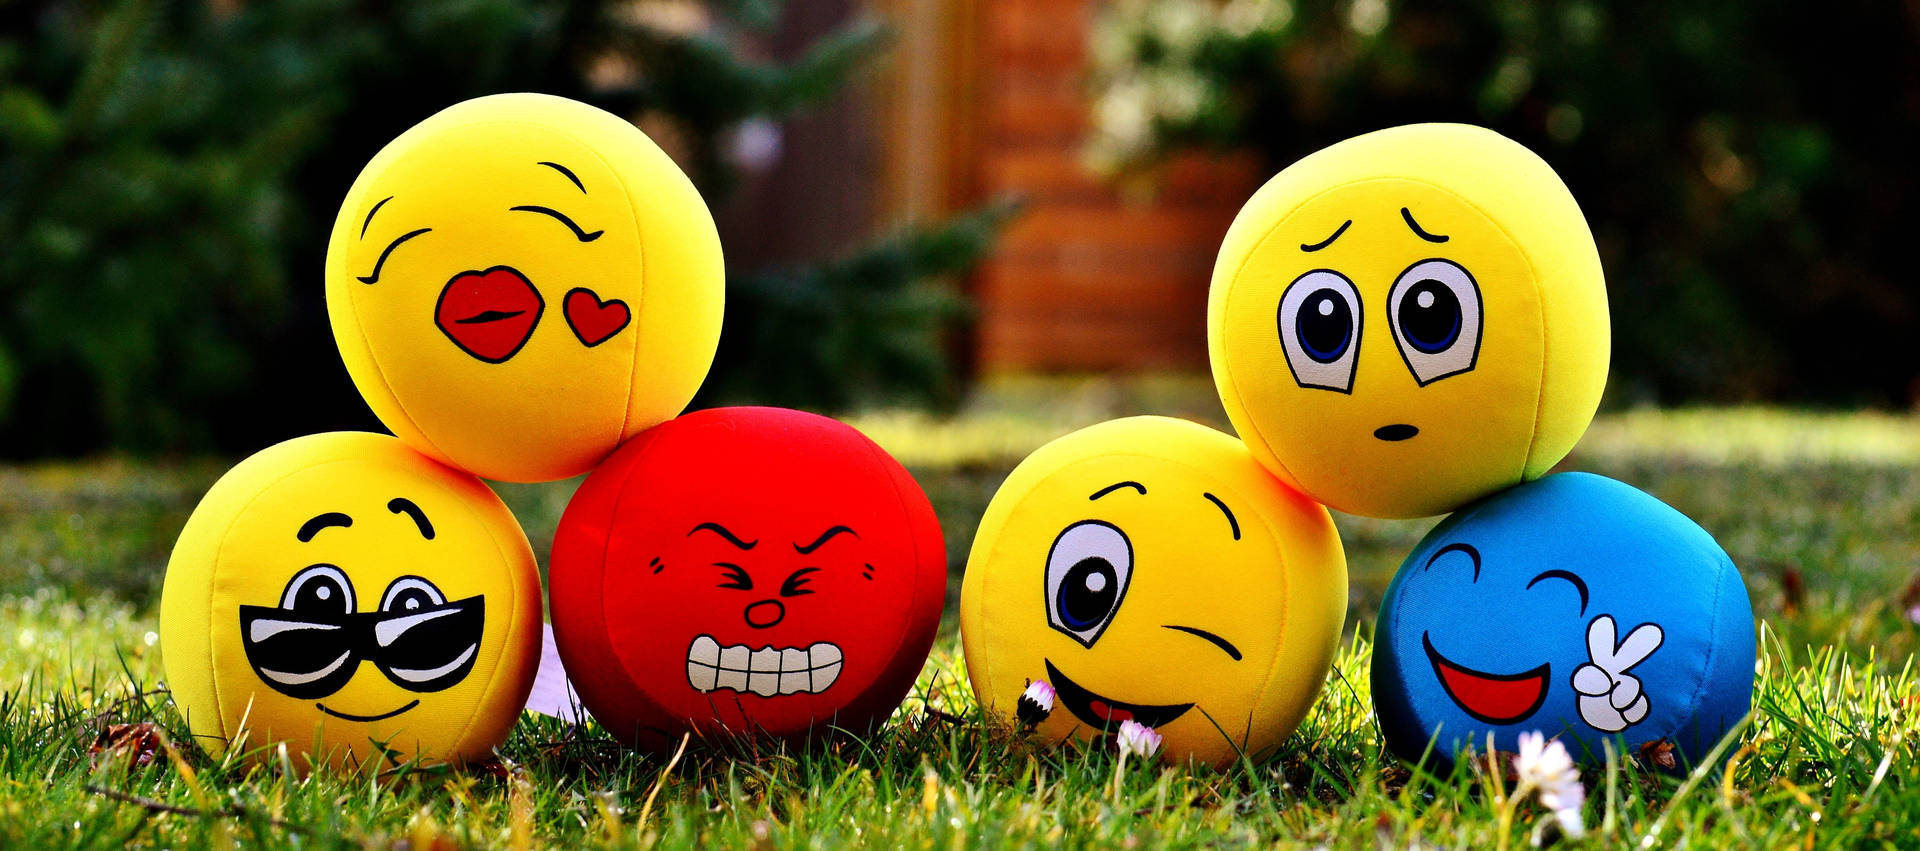 Free Smiley Face Wallpaper Downloads, [300+] Smiley Face Wallpapers for  FREE 